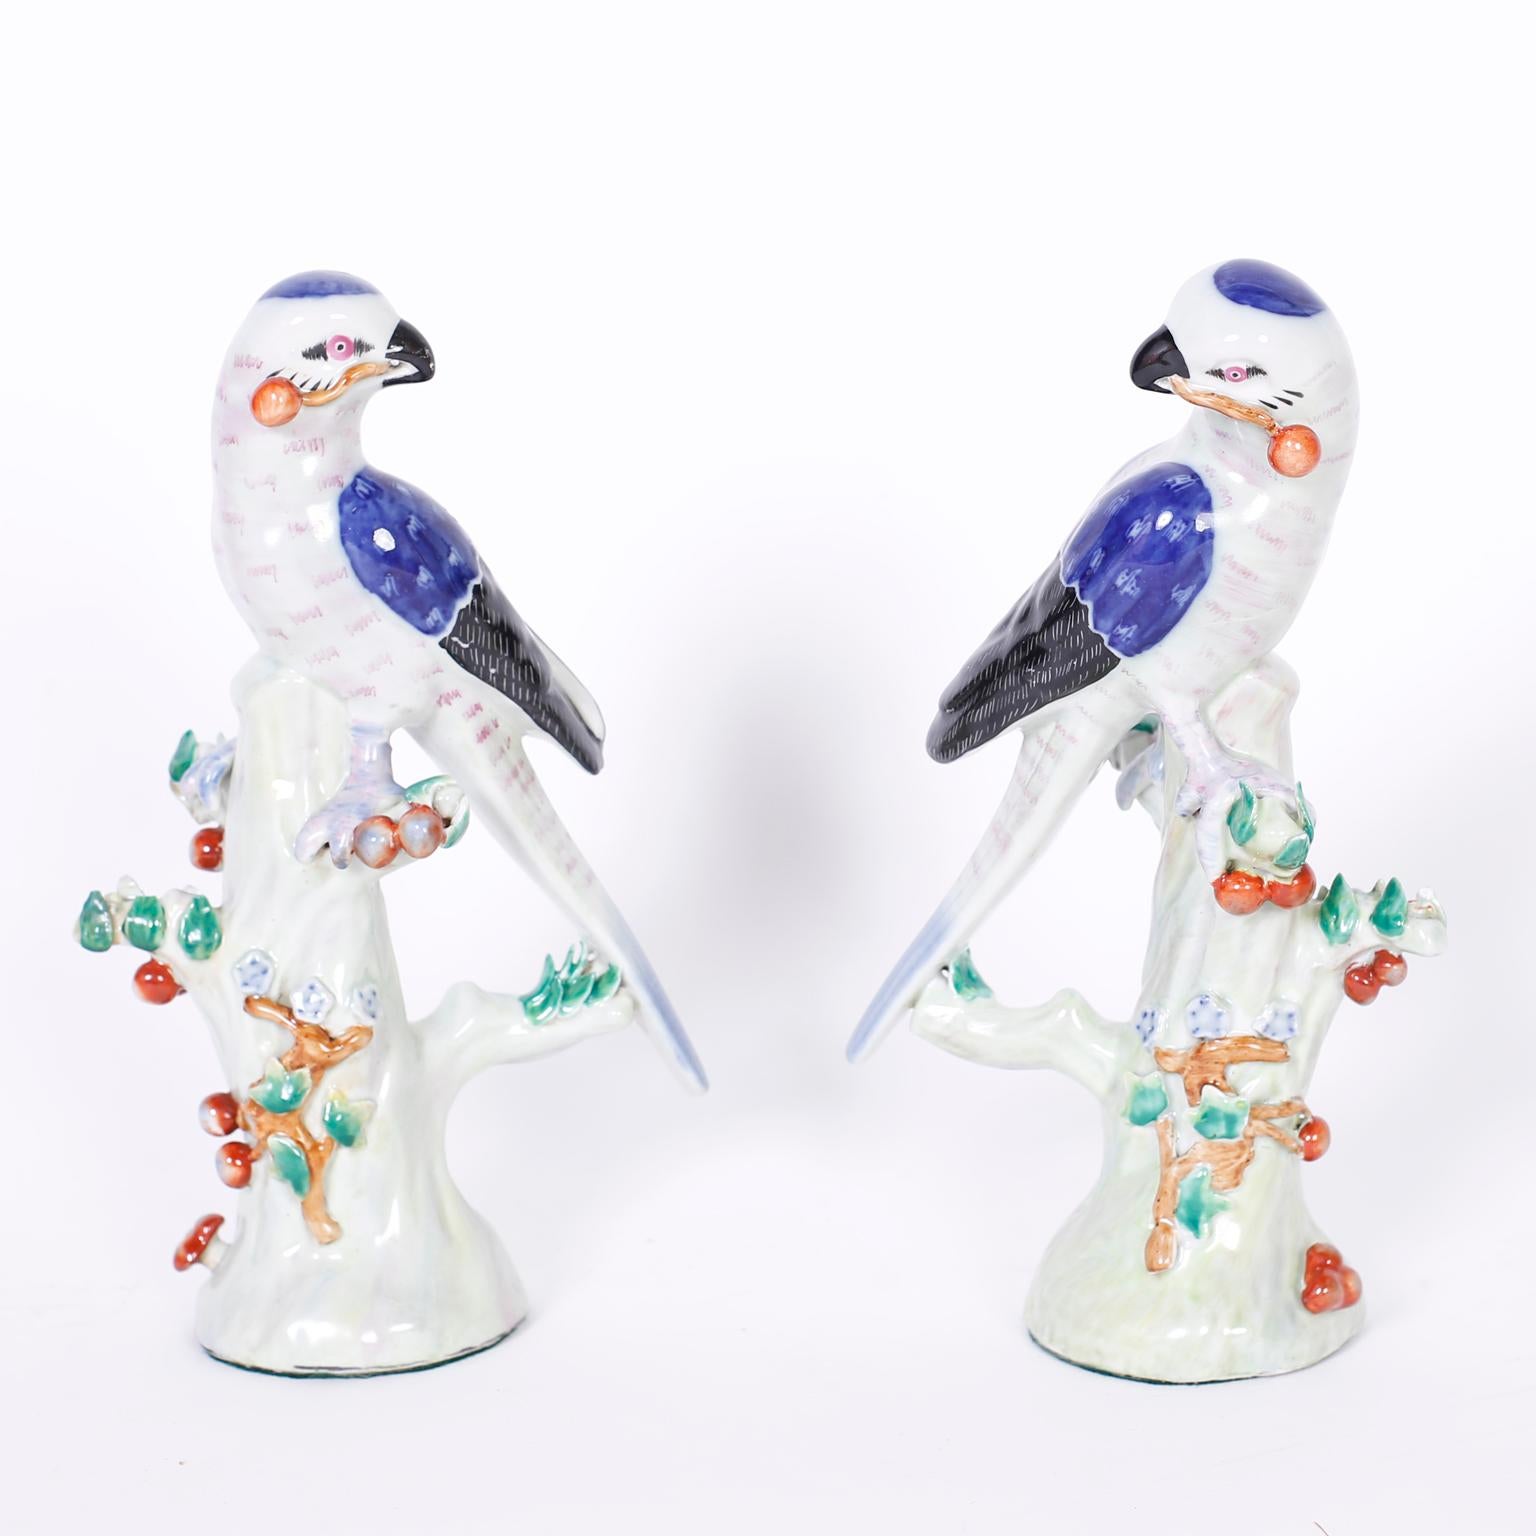 Lofty pair of Chinese porcelain birds delicately hand painted with blues and black, perched on stylized fruit baring trees.